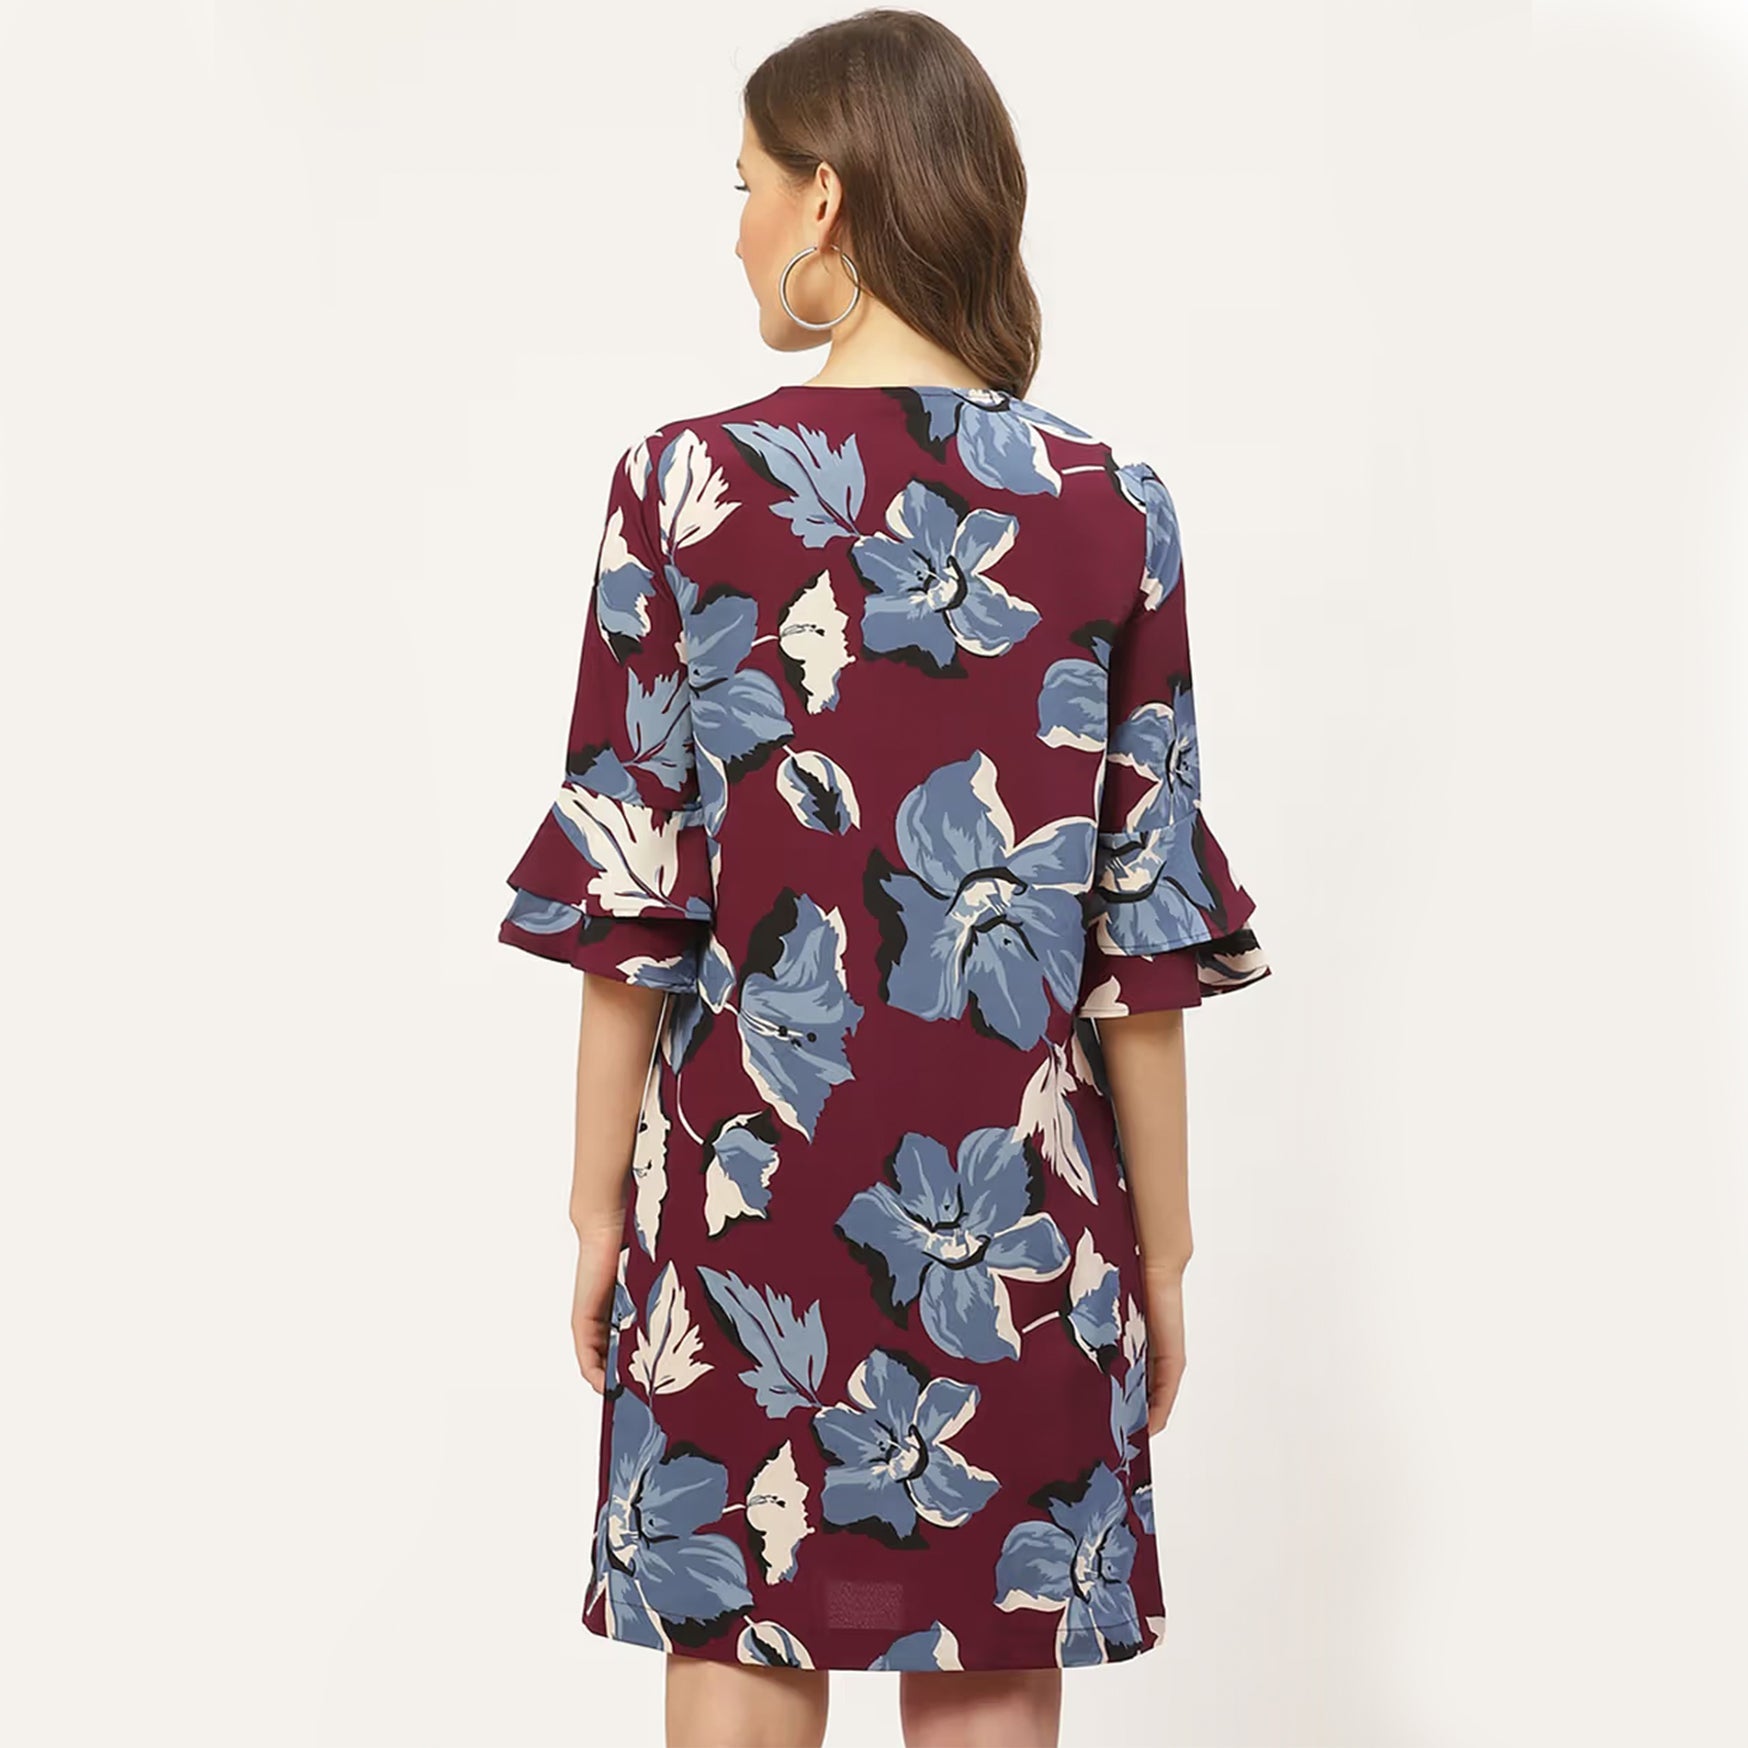 Women Burgundy and Blue Floral Printed A-Line Dress (S)